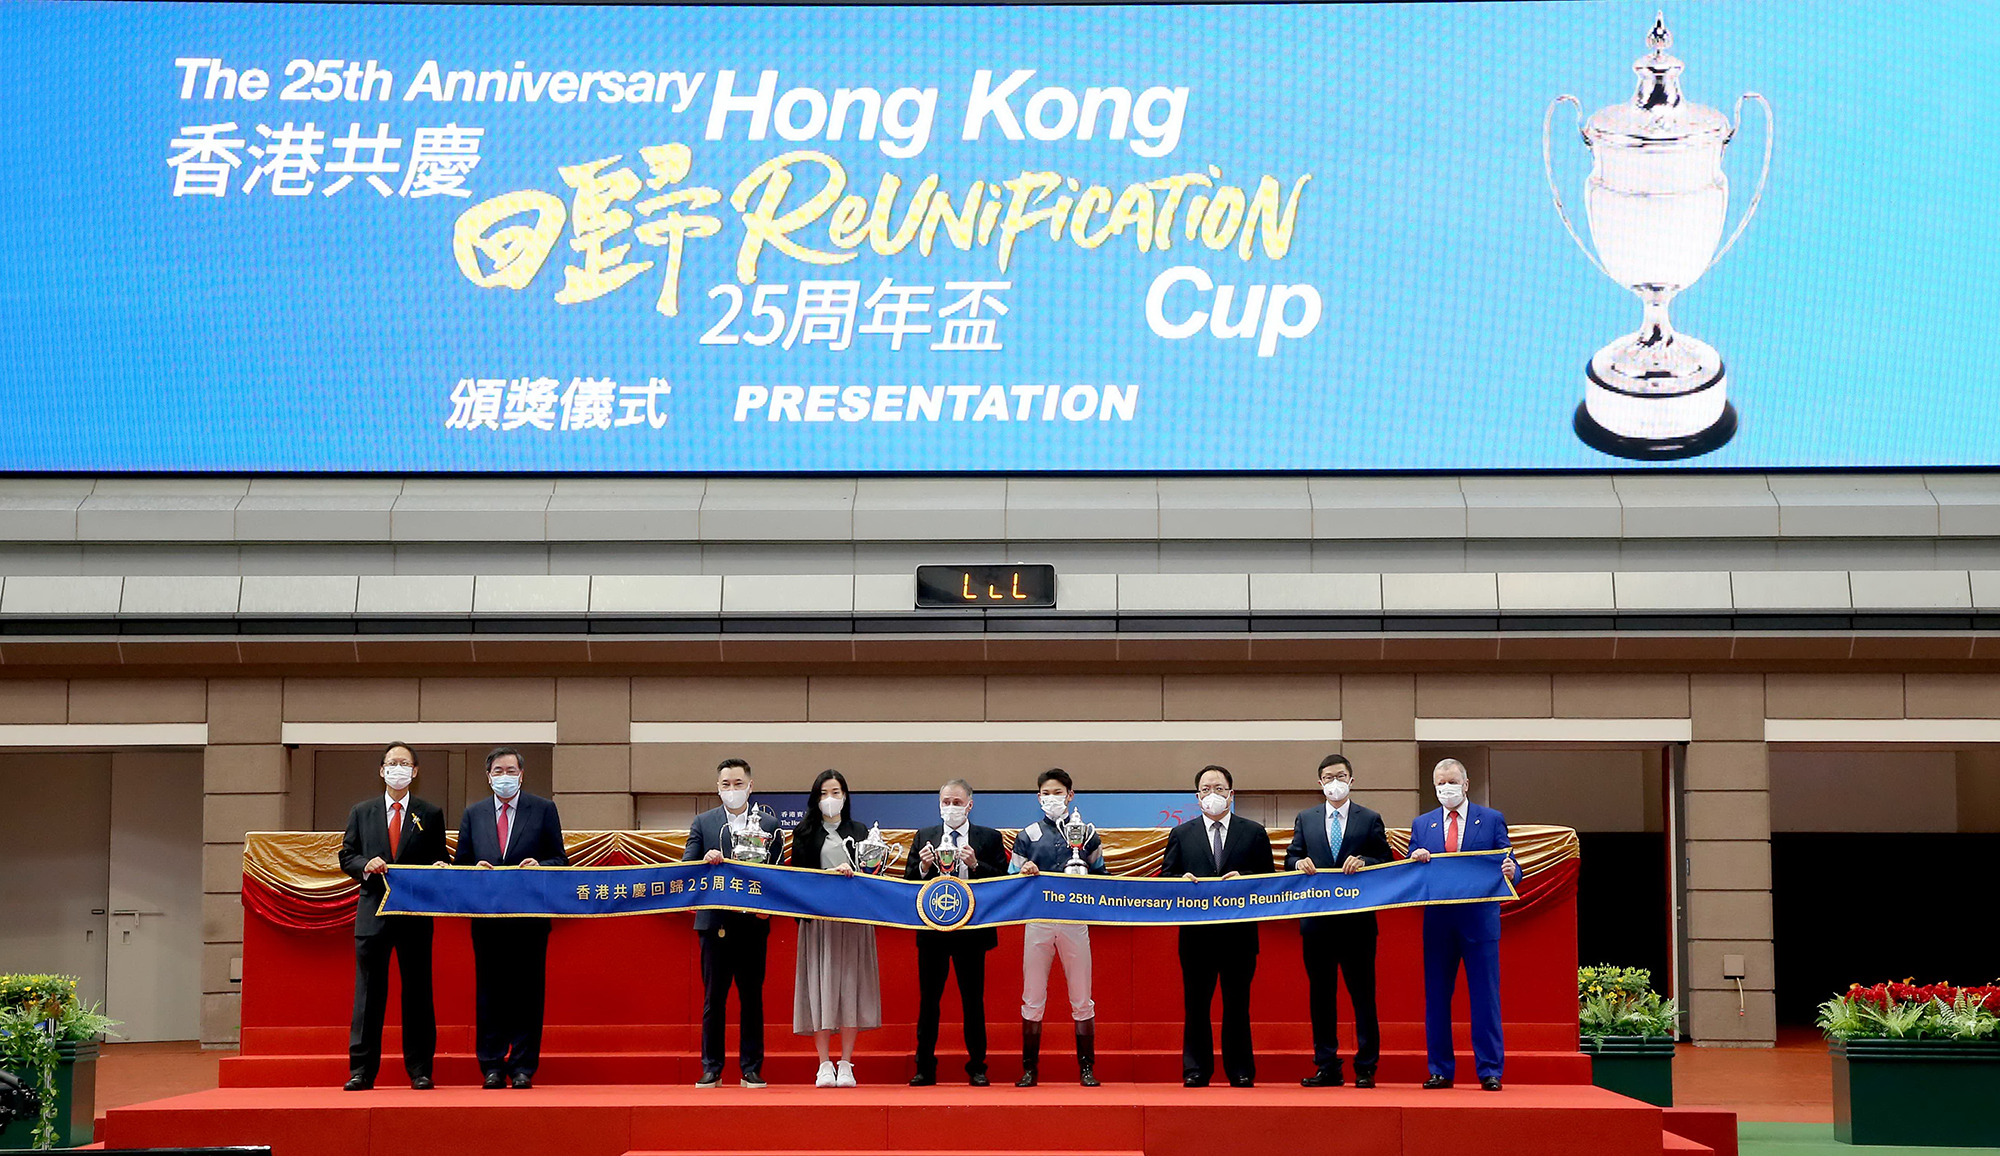 The President of the Legislative Council of the HKSAR Andrew Leung (2nd left); Deputy Commissioner of Office of the Commissioner of the Ministry of Foreign Affairs of the People’s Republic of China in the HKSAR, Pan Yundong (3rd right); Deputy Director of Department of Publicity, Cultural and Sports Affairs of the Liaison Office of the Central People’s Government in the HKSAR, Wang Kaibo (2nd right); Club Chairman Philip Chen (1st left) and Club Chief Executive Officer Winfried Engelbrecht-Bresges (1st right) at the 25th Anniversary Hong Kong Reunification Cup trophy presentation ceremony.